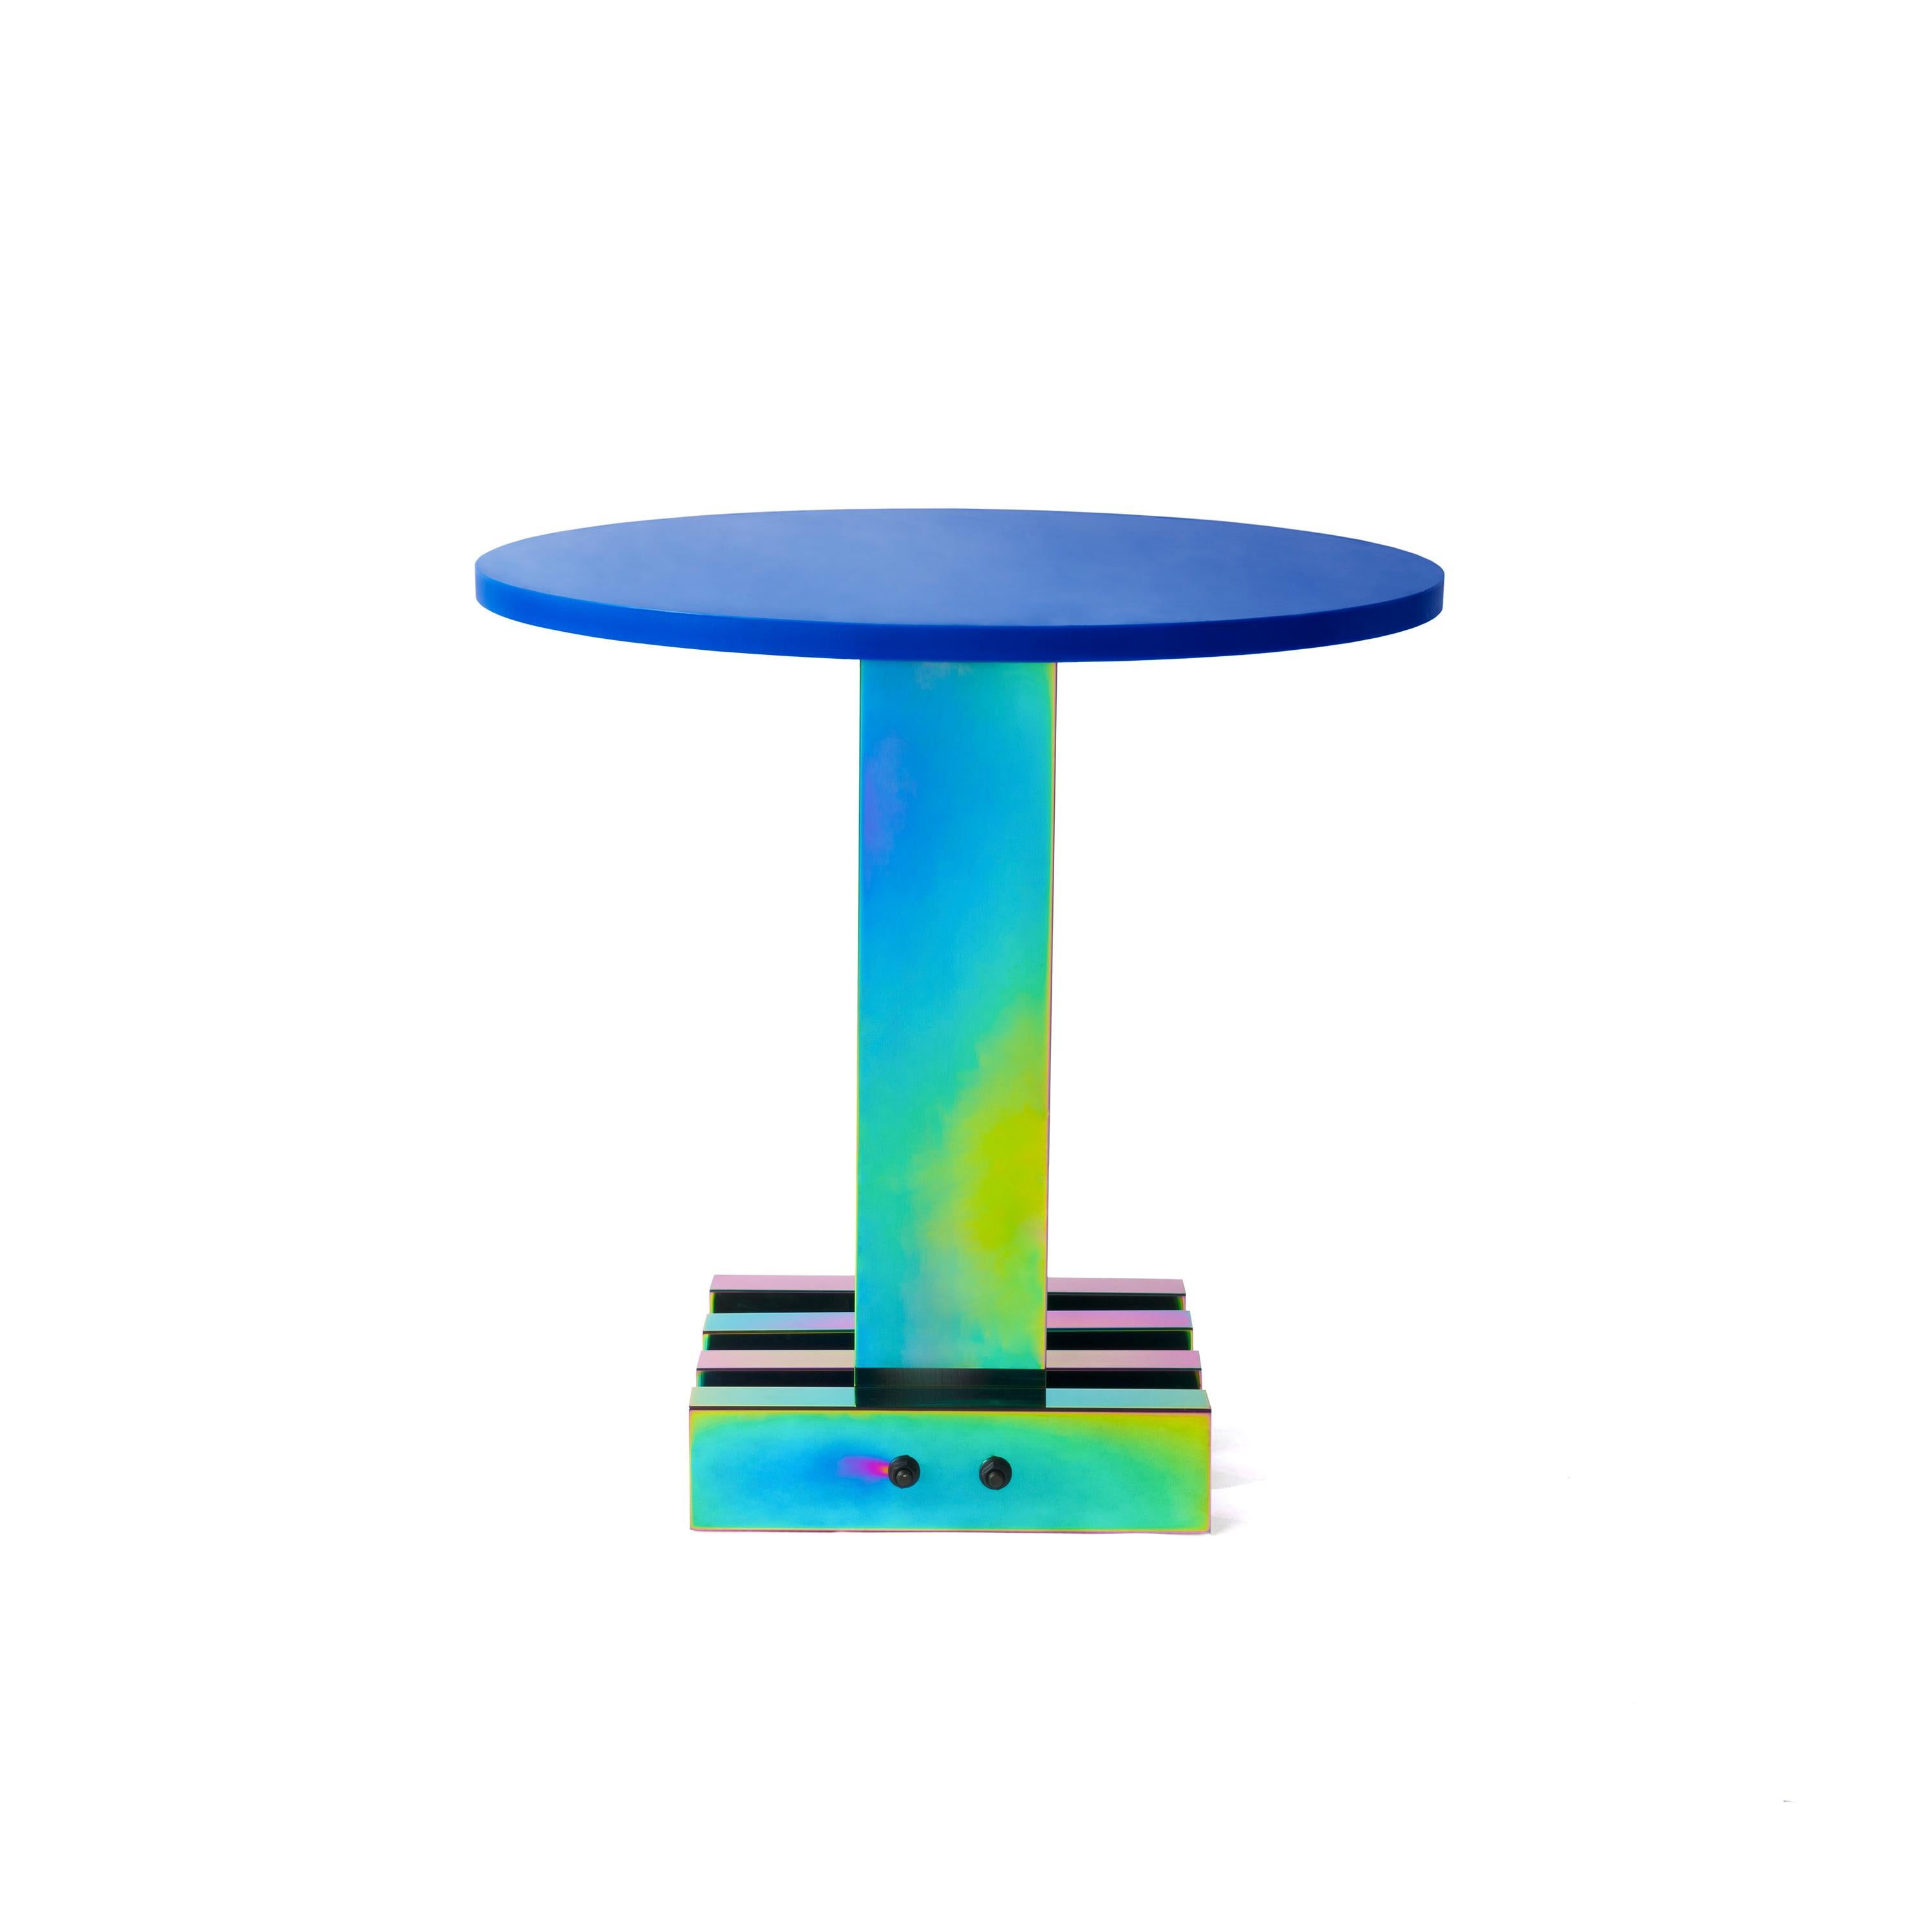 Chinese Contemporary Side Table / Dining Table, HOT Collection, Gradient Stainless Steel For Sale